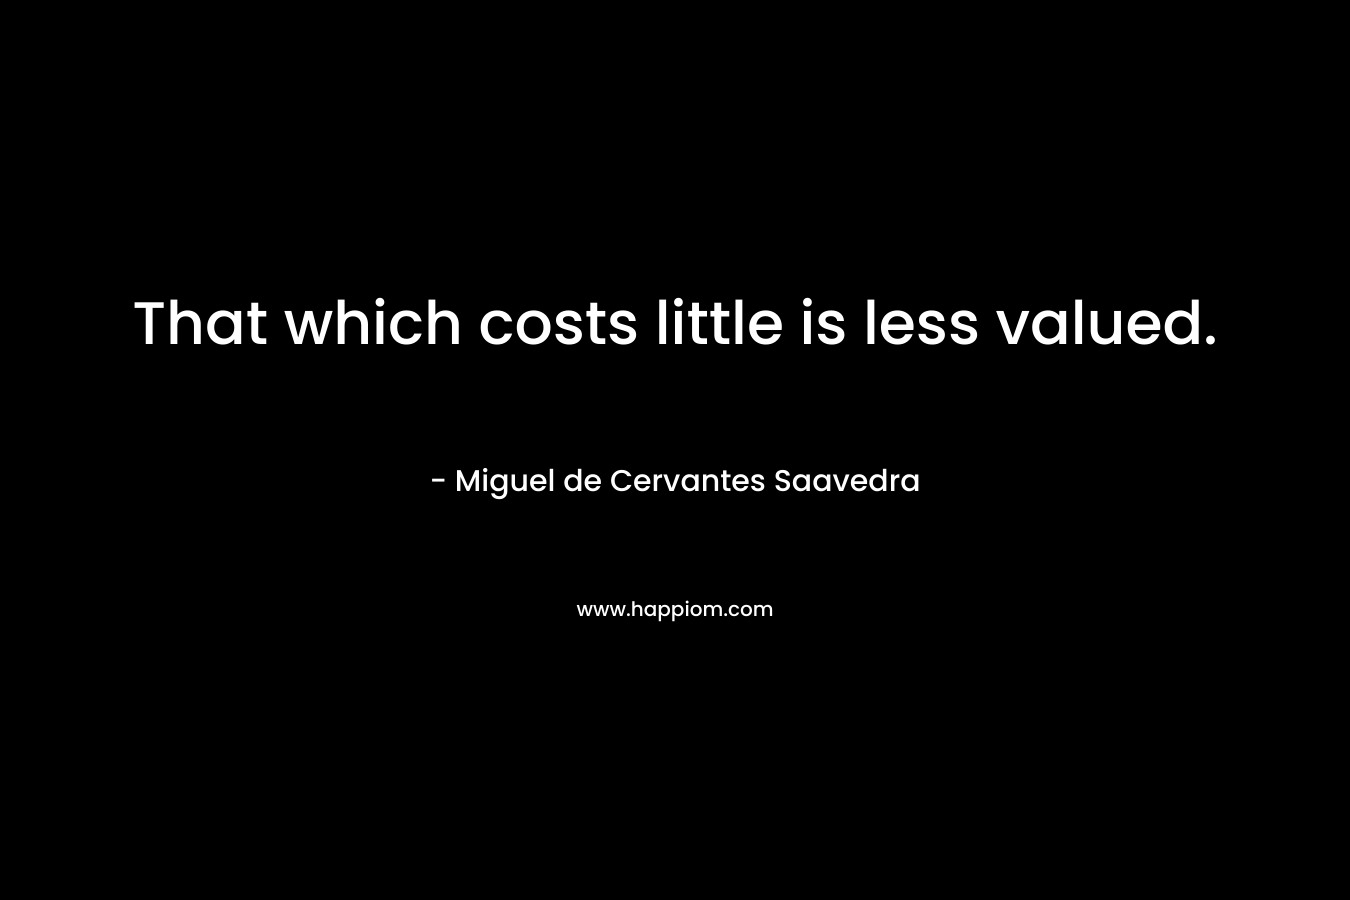 That which costs little is less valued. – Miguel de Cervantes Saavedra